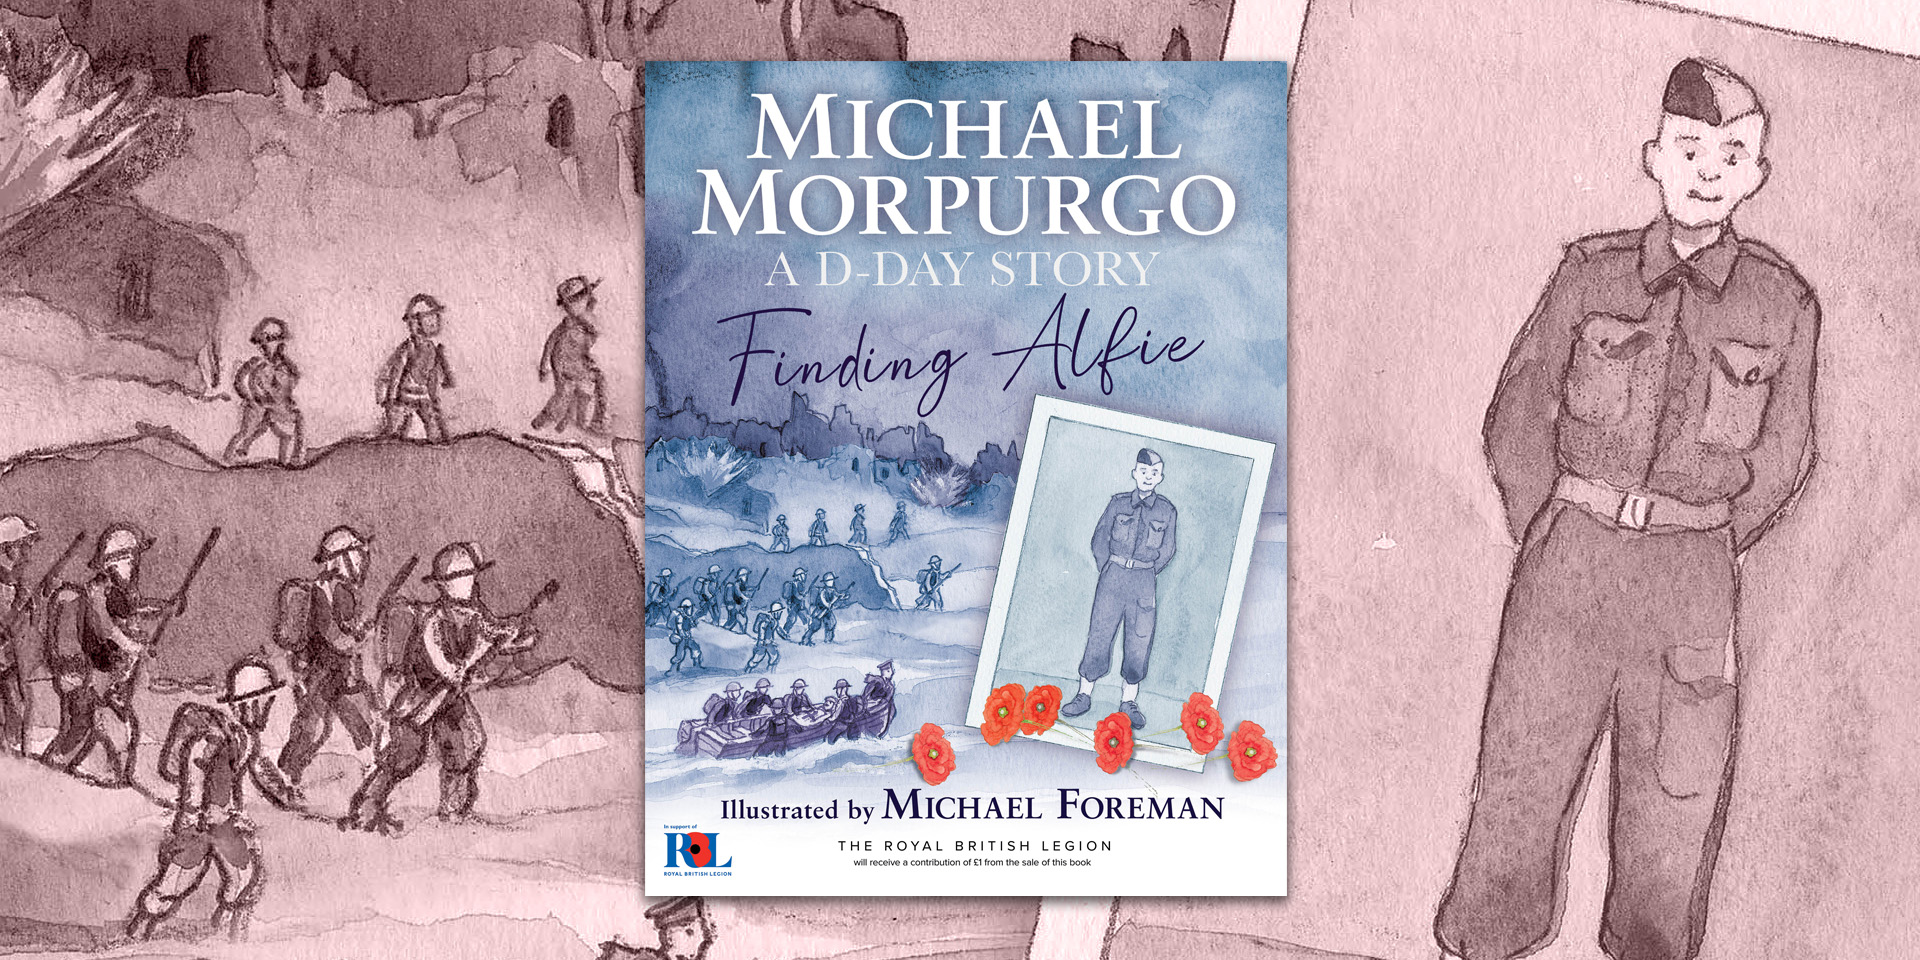 'Finding Alfie' book cover